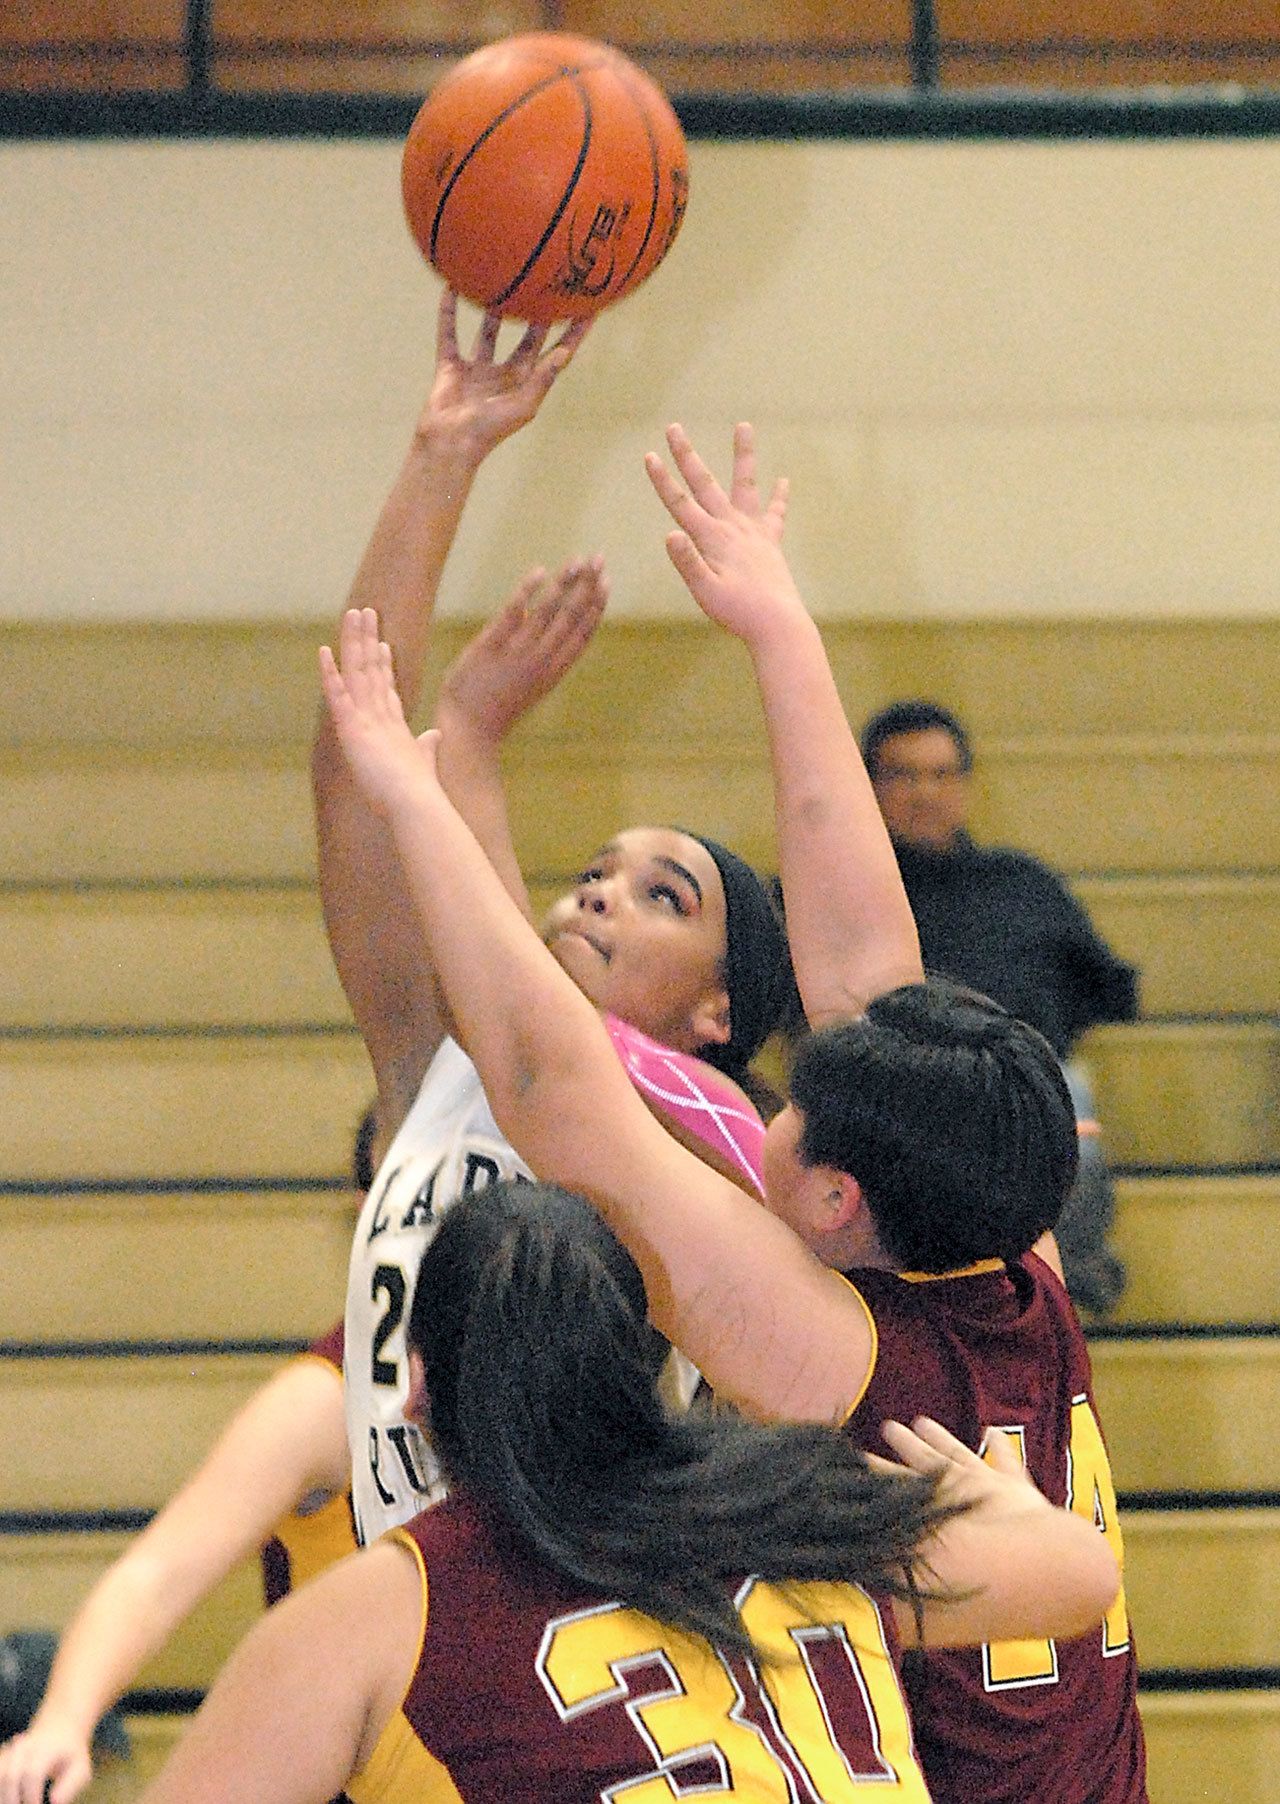 Keith Thorpe/Peninsula Daily News Clallam Bay’s Atokena Abe, top, makes a layup over the defense of Lopez Island’s Anna Velazquez, front, and Dariya Begman during a playoff game played Feb. 14 in Port Angeles.